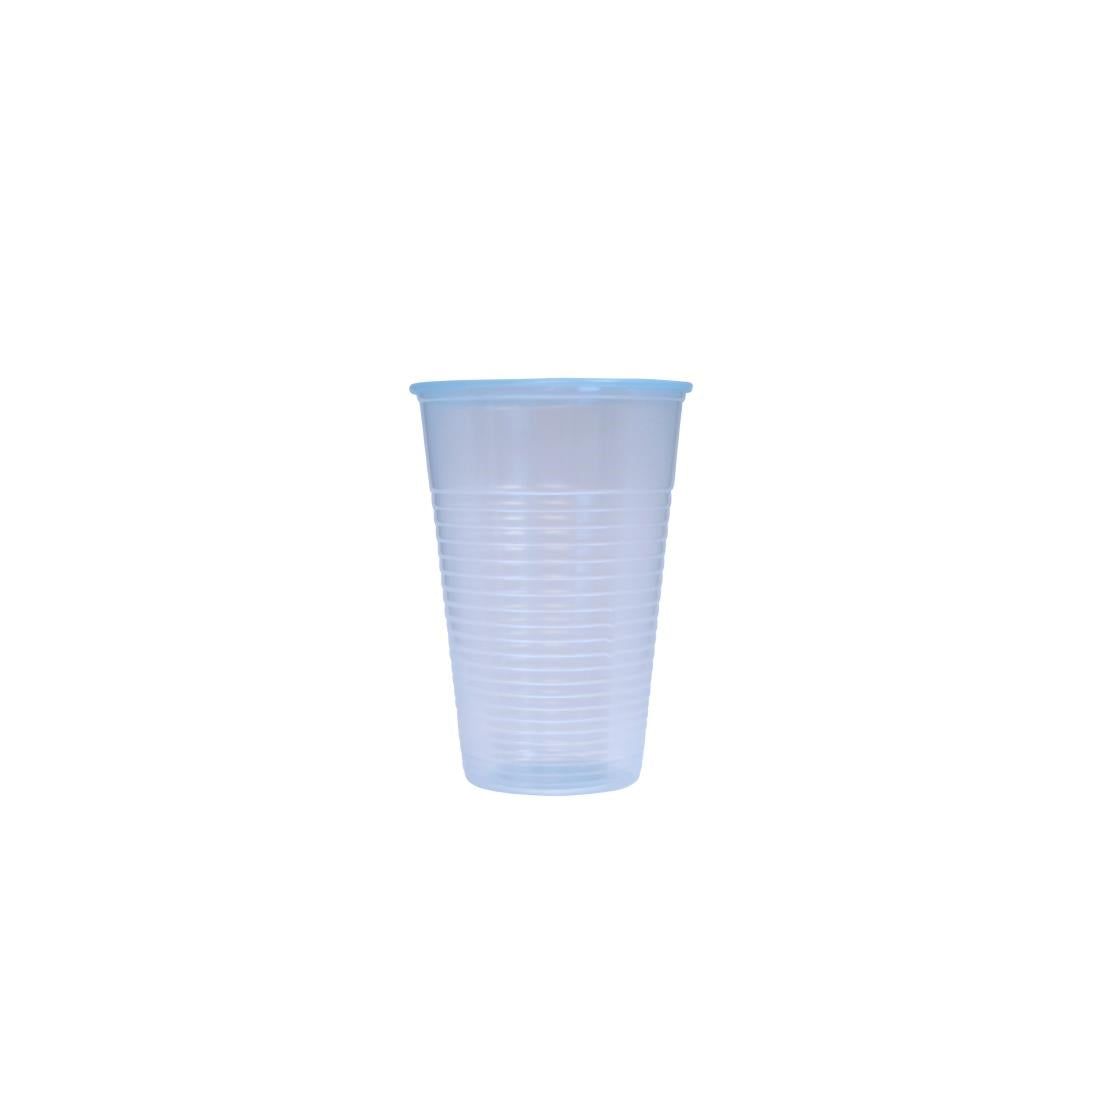 FU697 Tall Blue Water Cooler Cups 200ml (Pack of 2000)